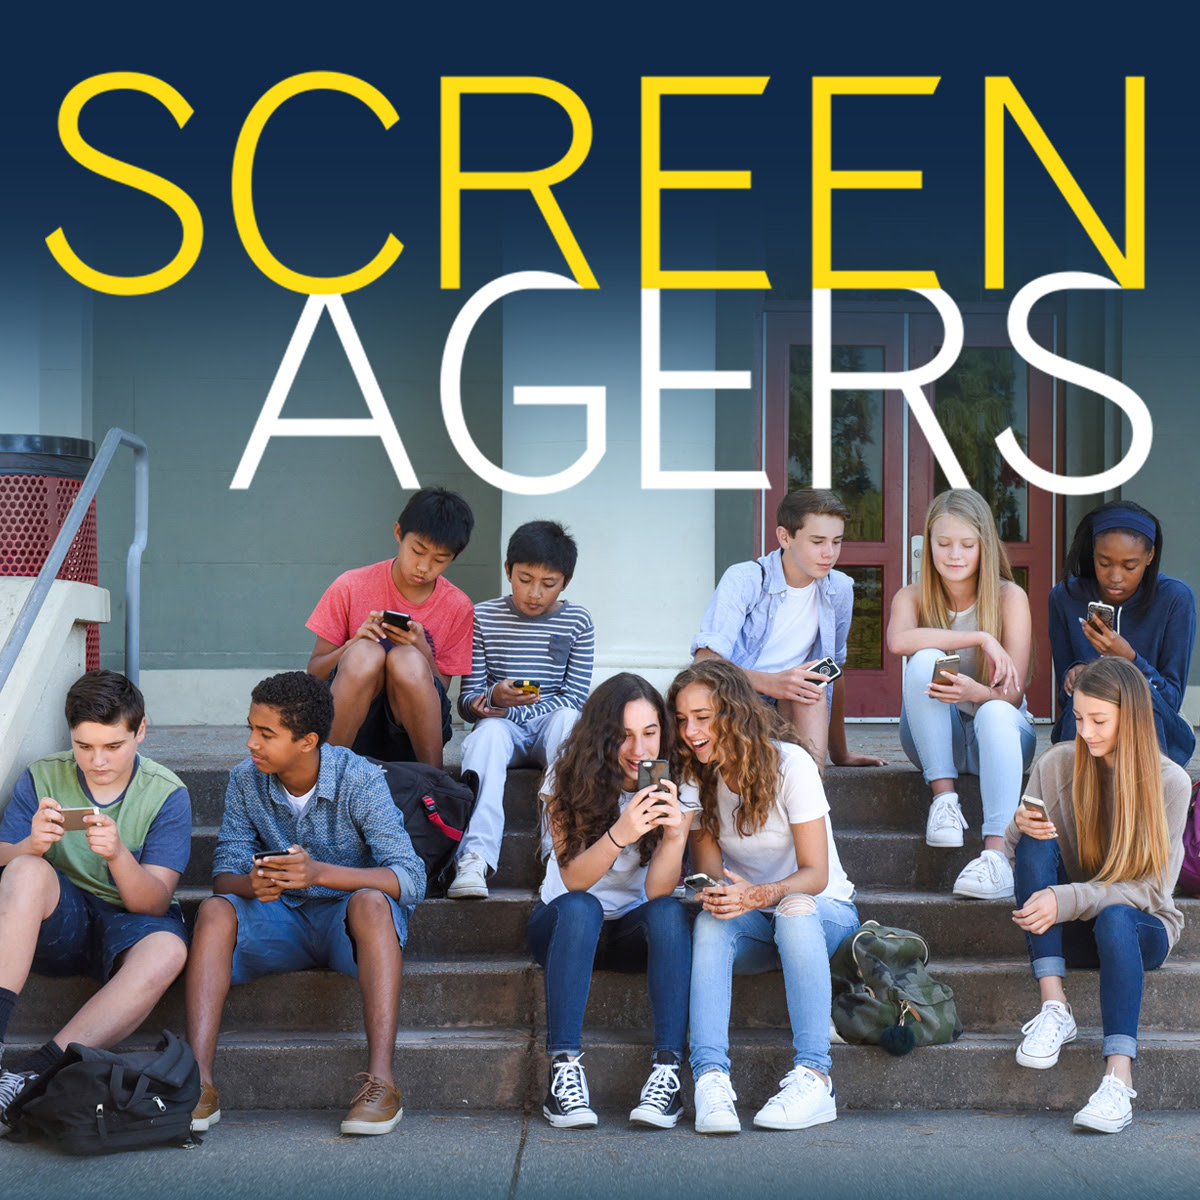 Screenagers Film Presented By Child & Youth Services